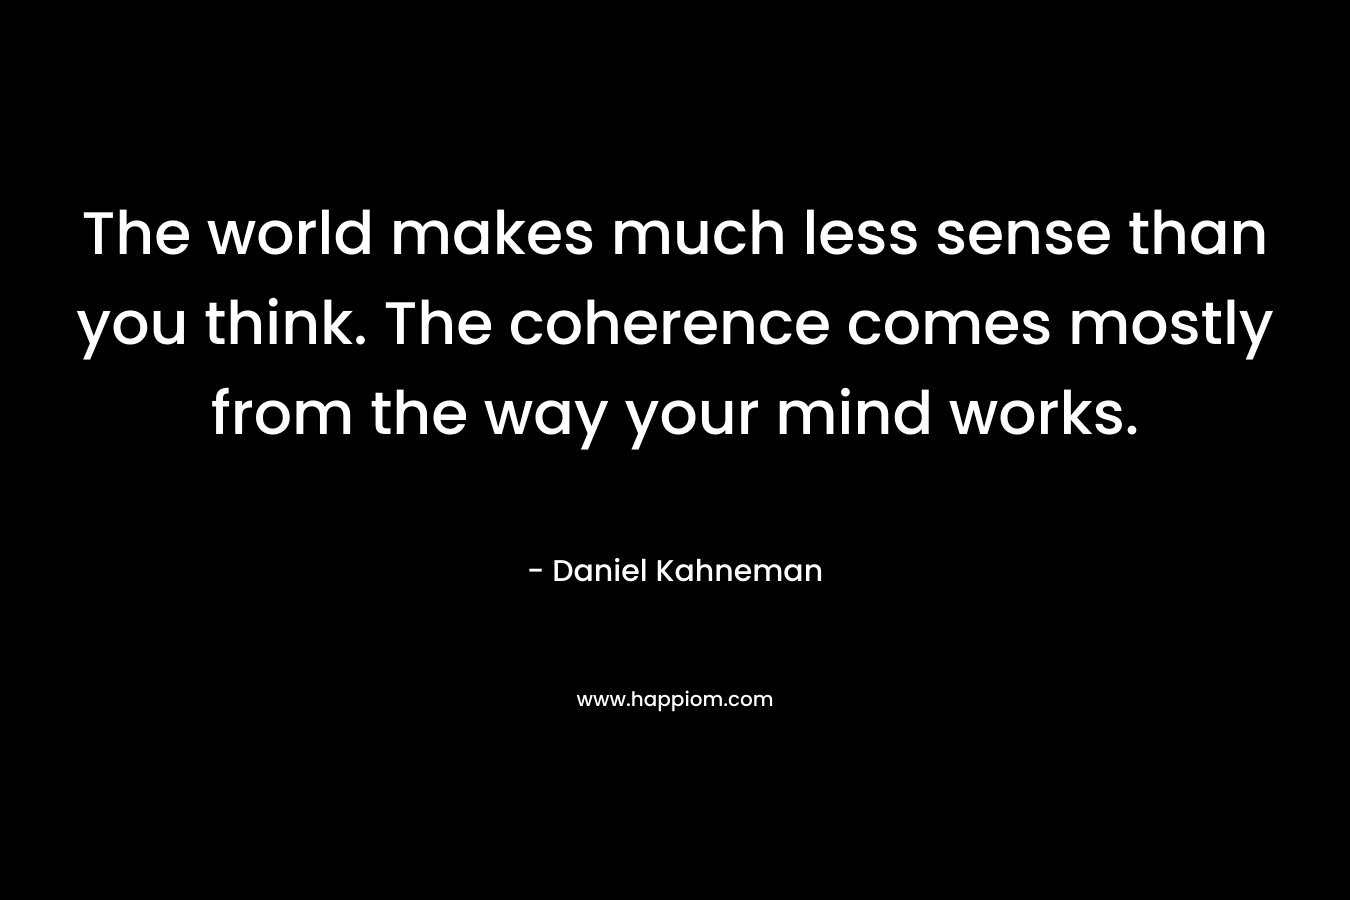 The world makes much less sense than you think. The coherence comes mostly from the way your mind works. – Daniel Kahneman